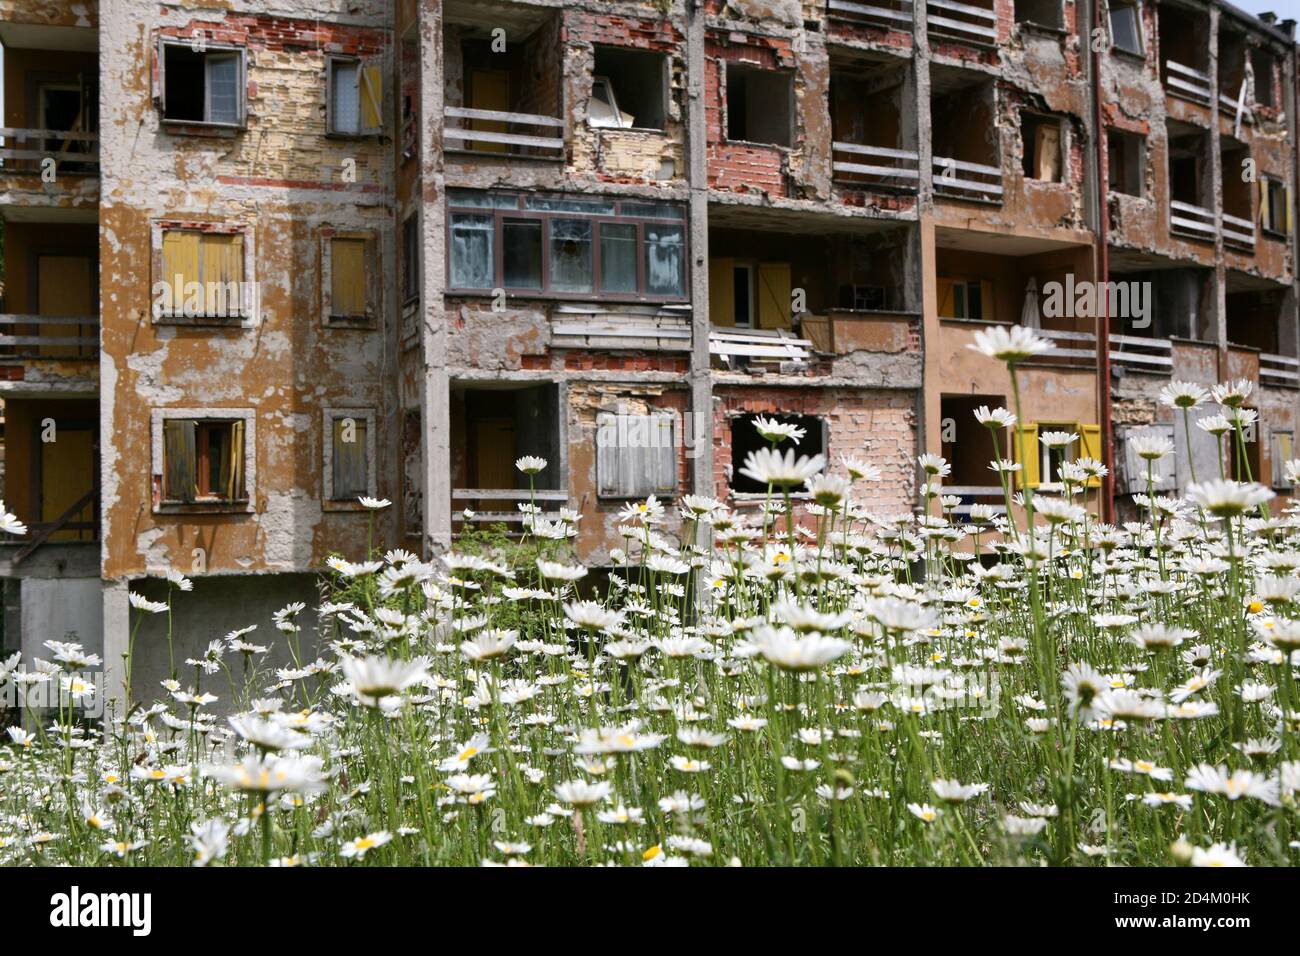 Ruined building with flowers Stock Photo